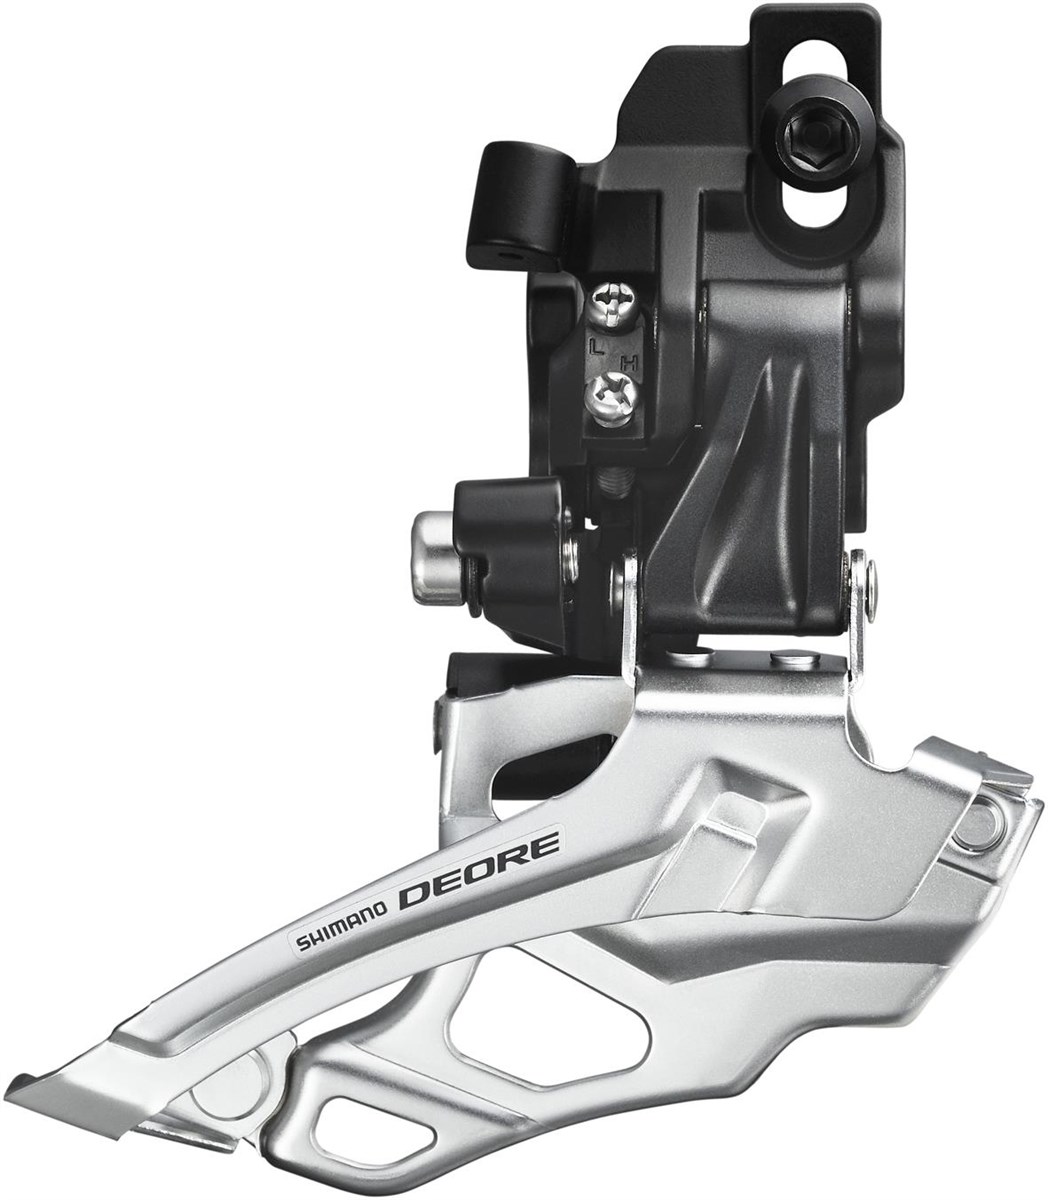 Shimano FD-M616 Deore 10 Speed Double Front Derailleur product image